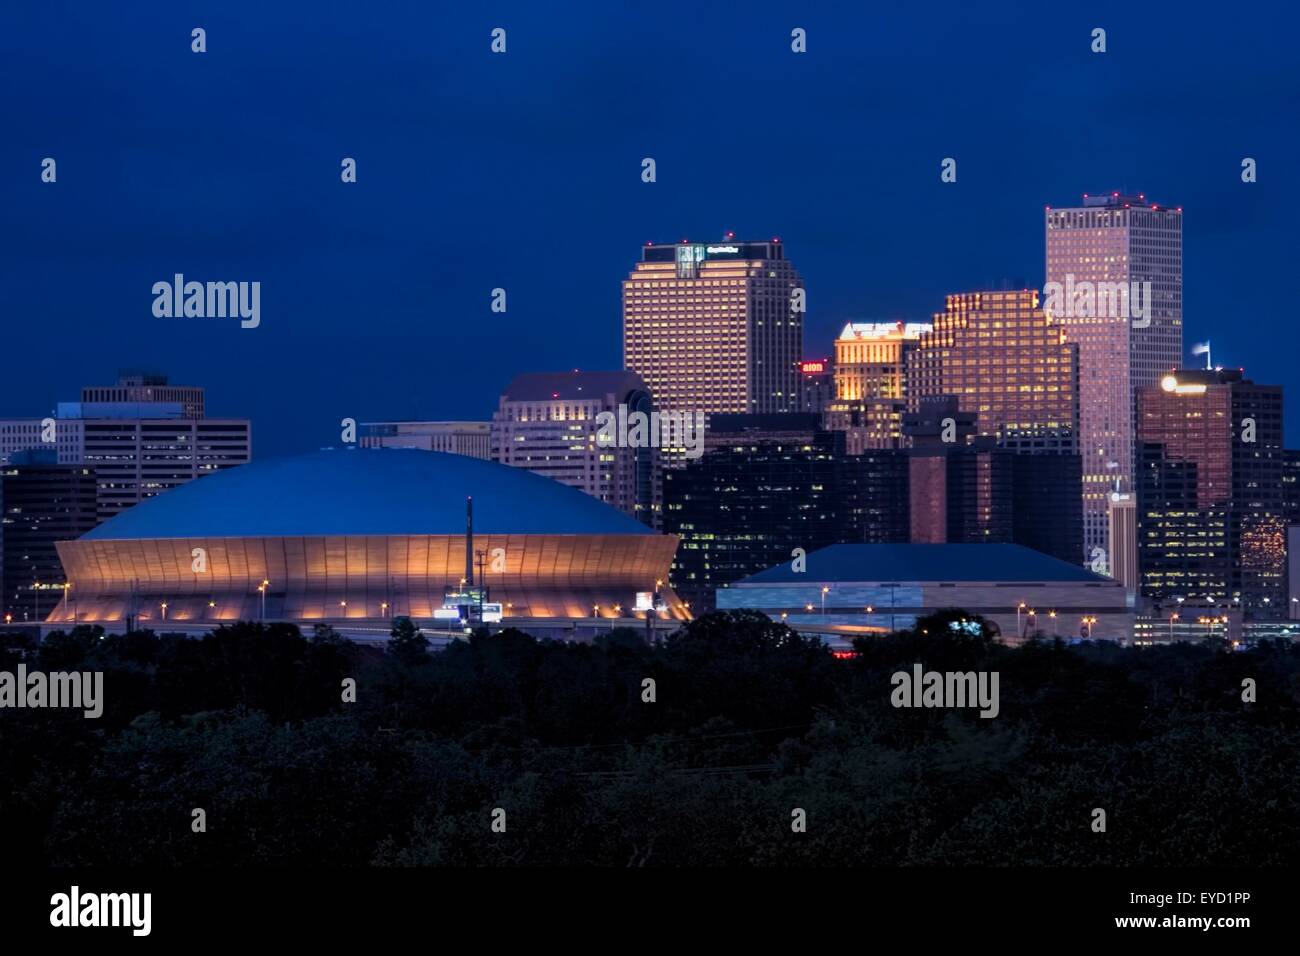 Dusk Shot of the Mercedes-Benz Superdome in New Orleans, Louisiana. Stock Photo